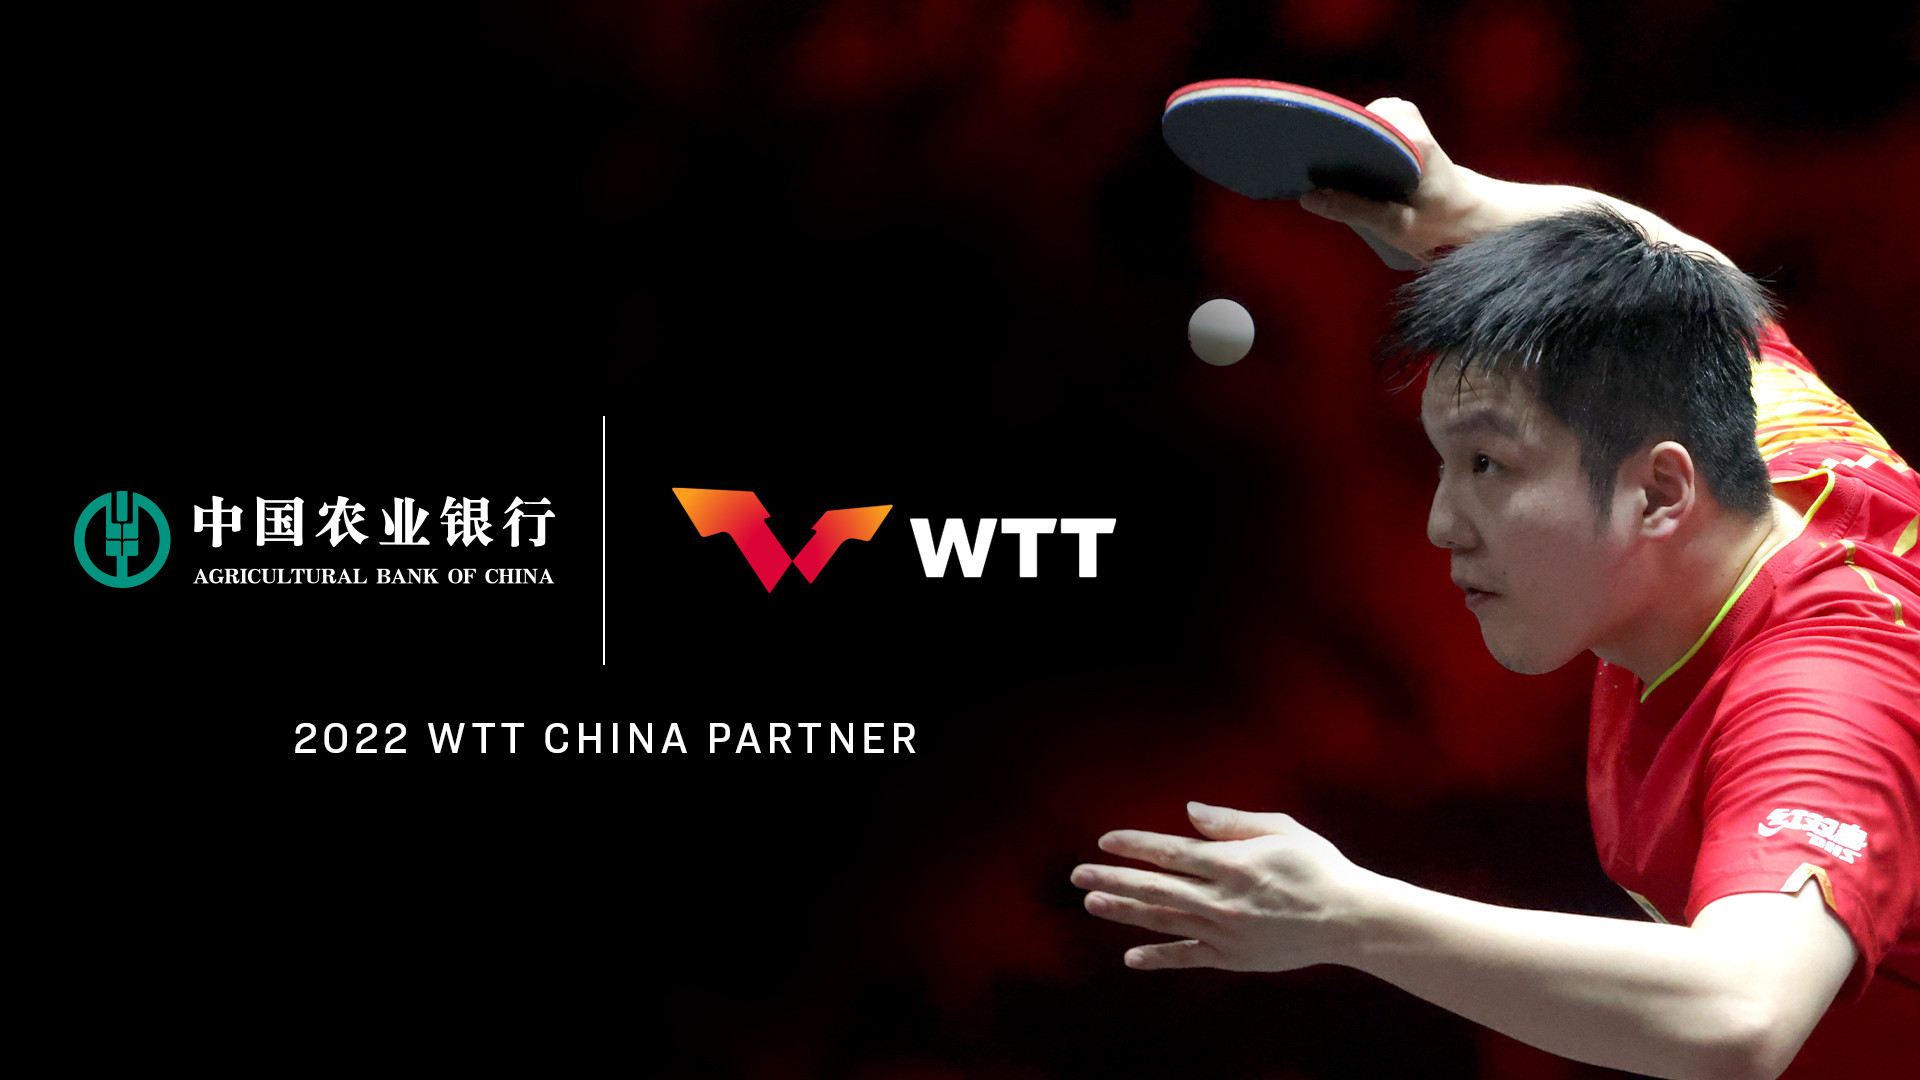 The Agricultural Bank of China is a 2022 partner of WTT China ©WTT